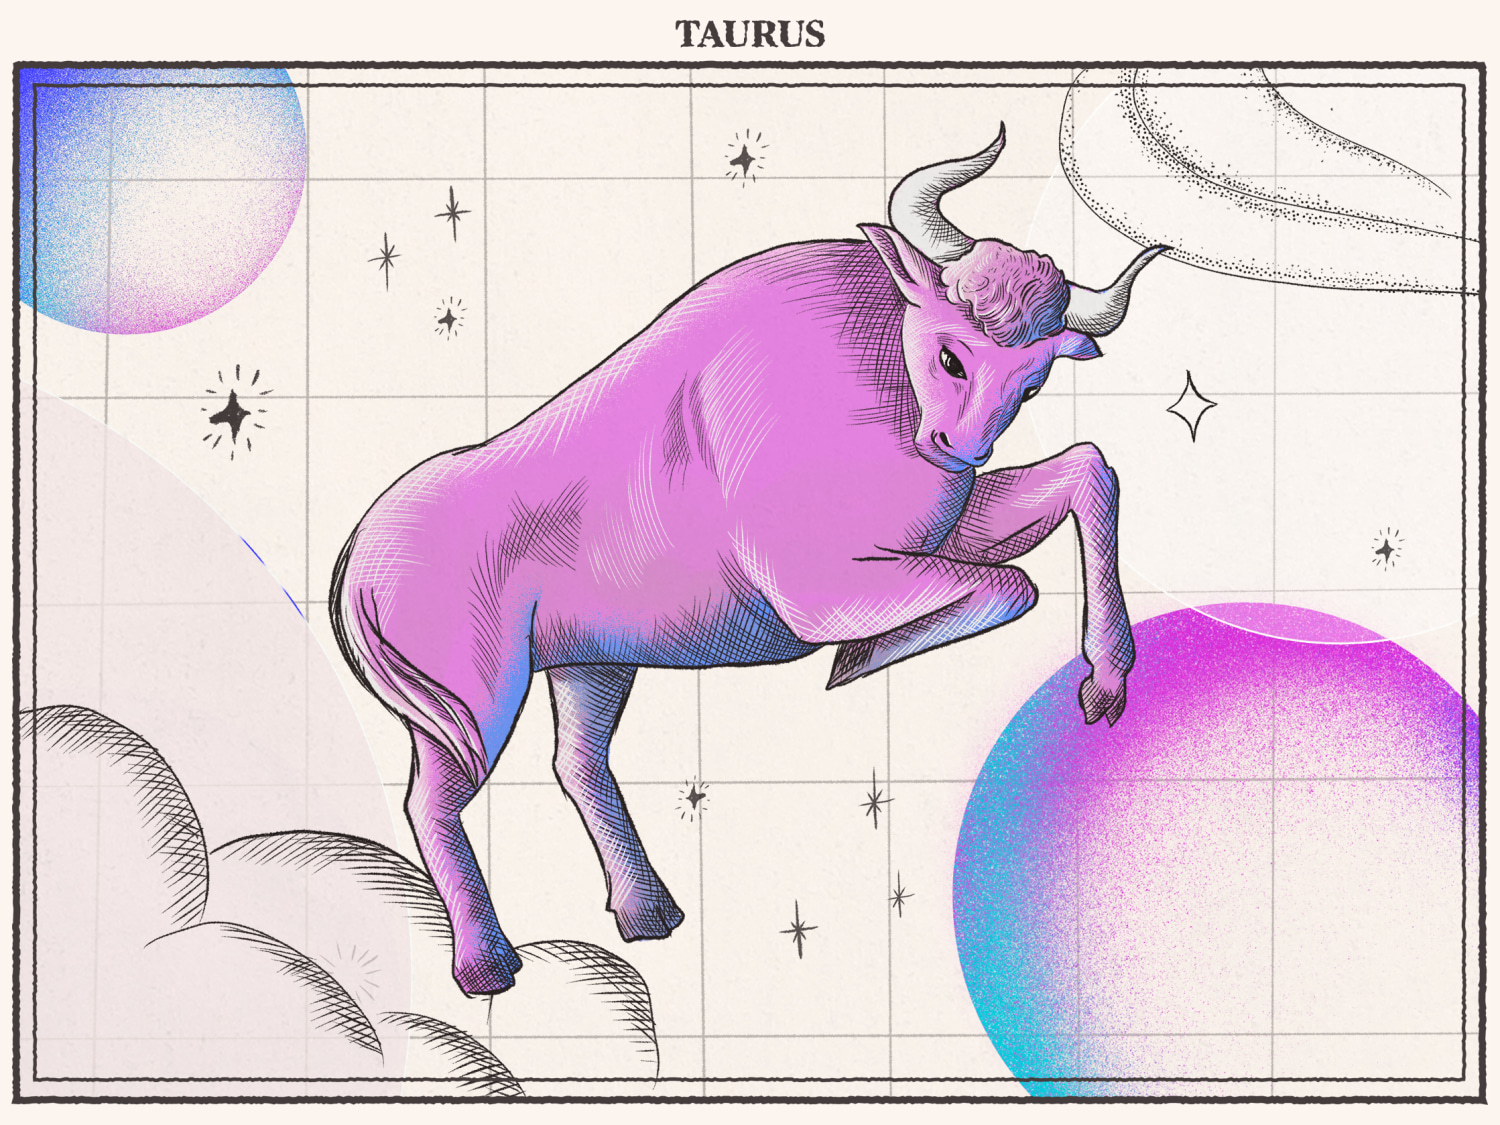 Taurus Rising : Personality Traits, Appearance, Compatibility